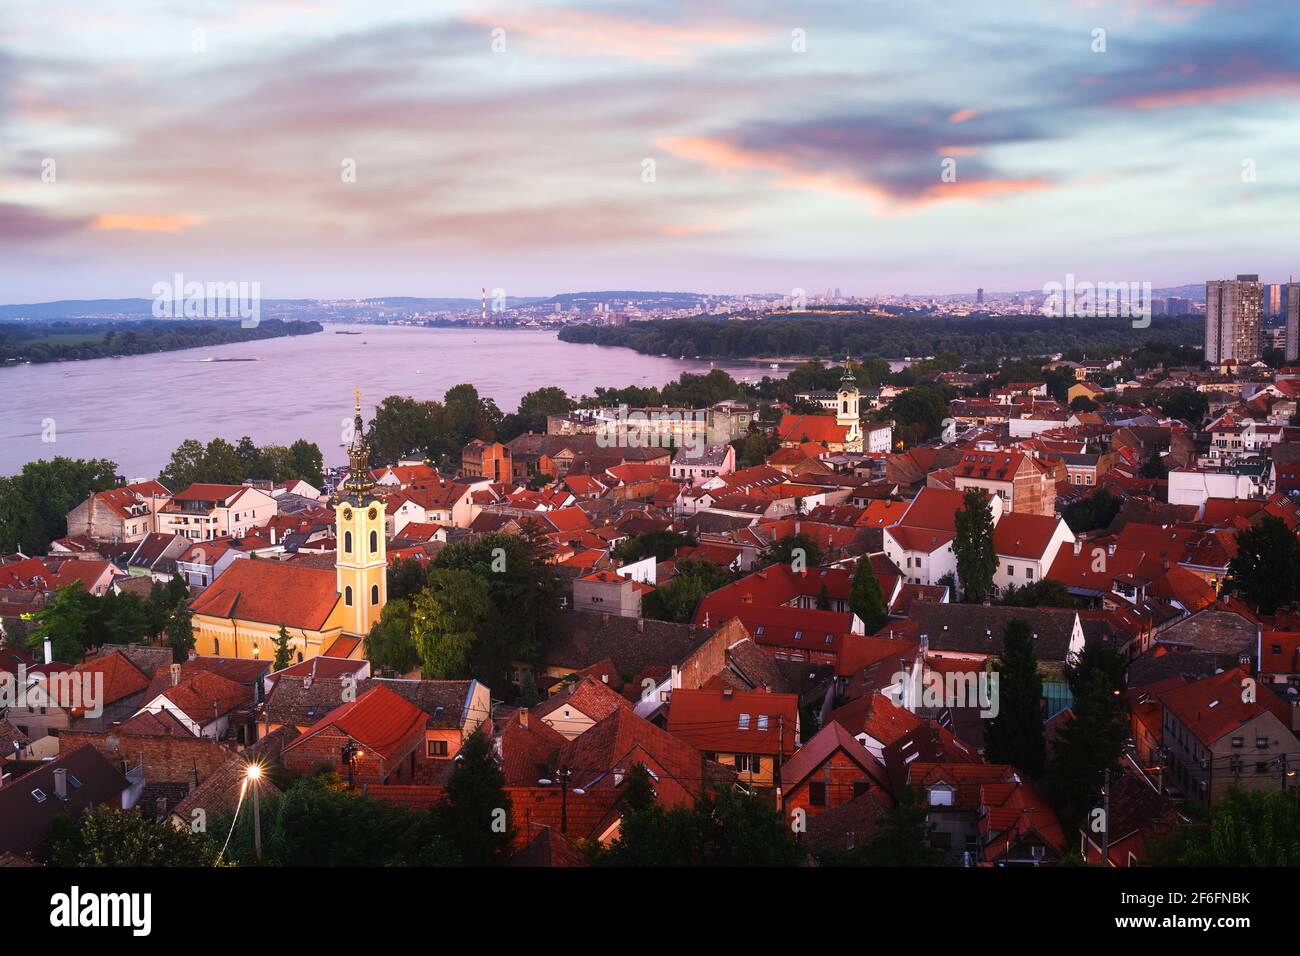 Beautiful sunset above the Danube river and rooftops in the city, Zemun, Belgrade, Serbia Stock Photo